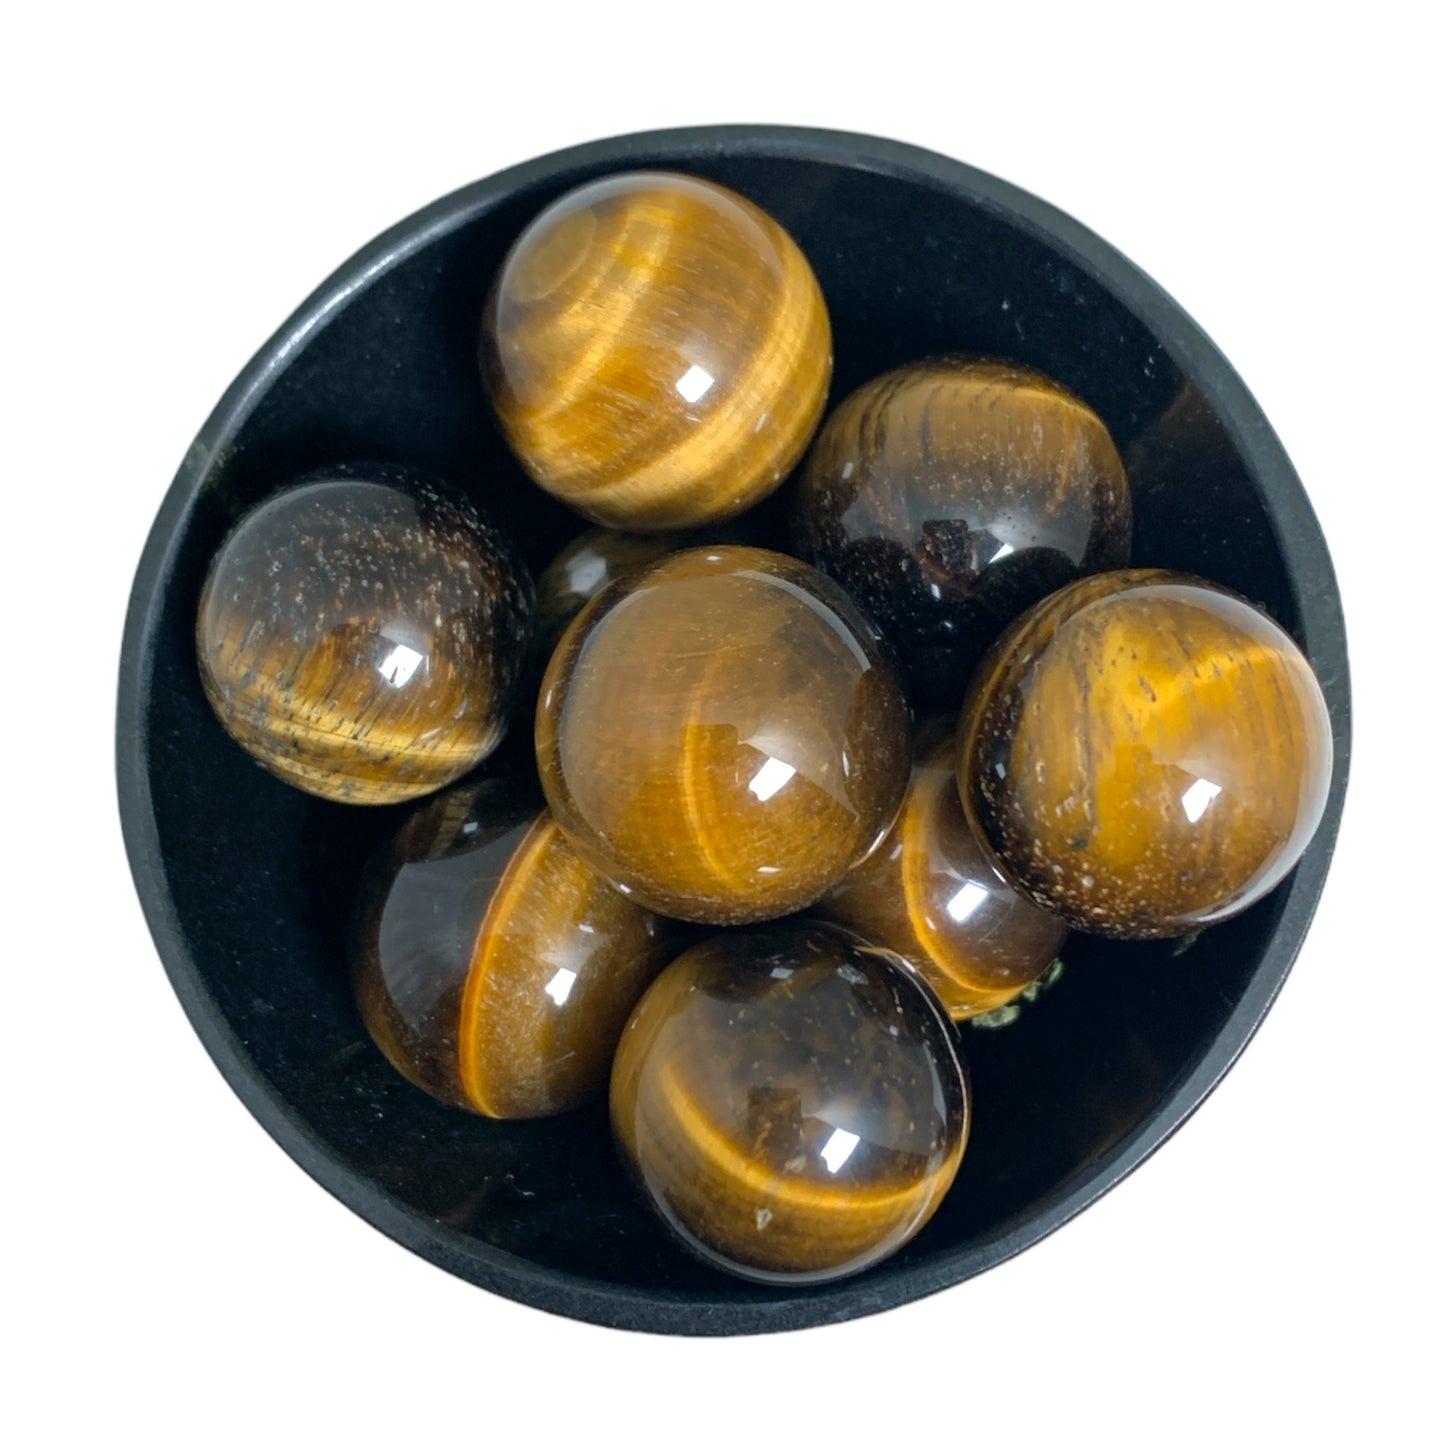 TIGERS EYE - .75 - 1 inch - 
Sphere - China - NEW523